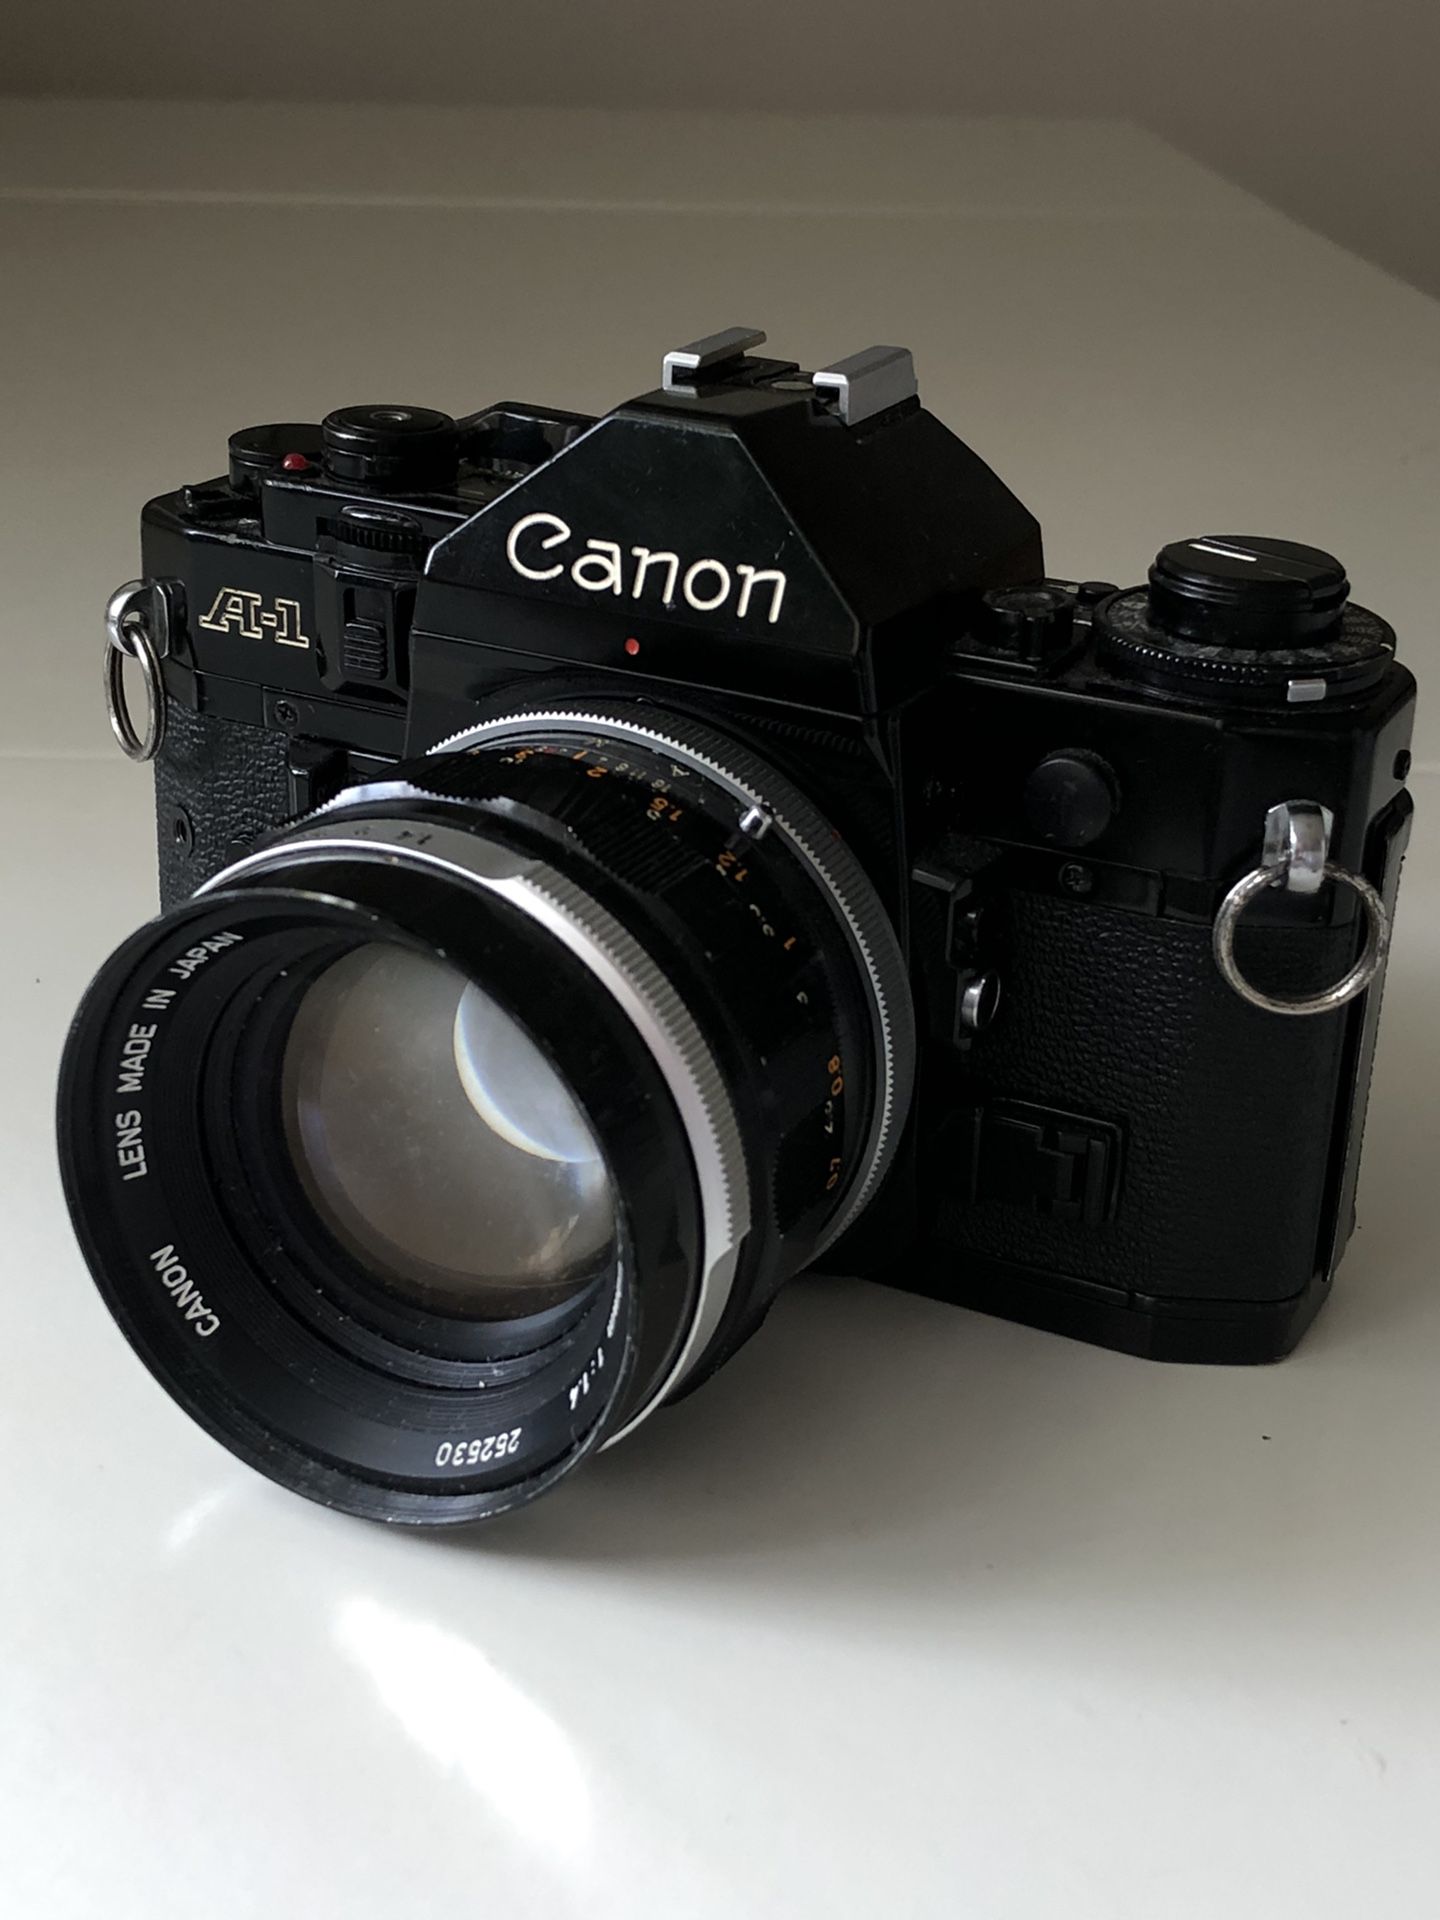 Canon A-1 film camera with 50mm lens